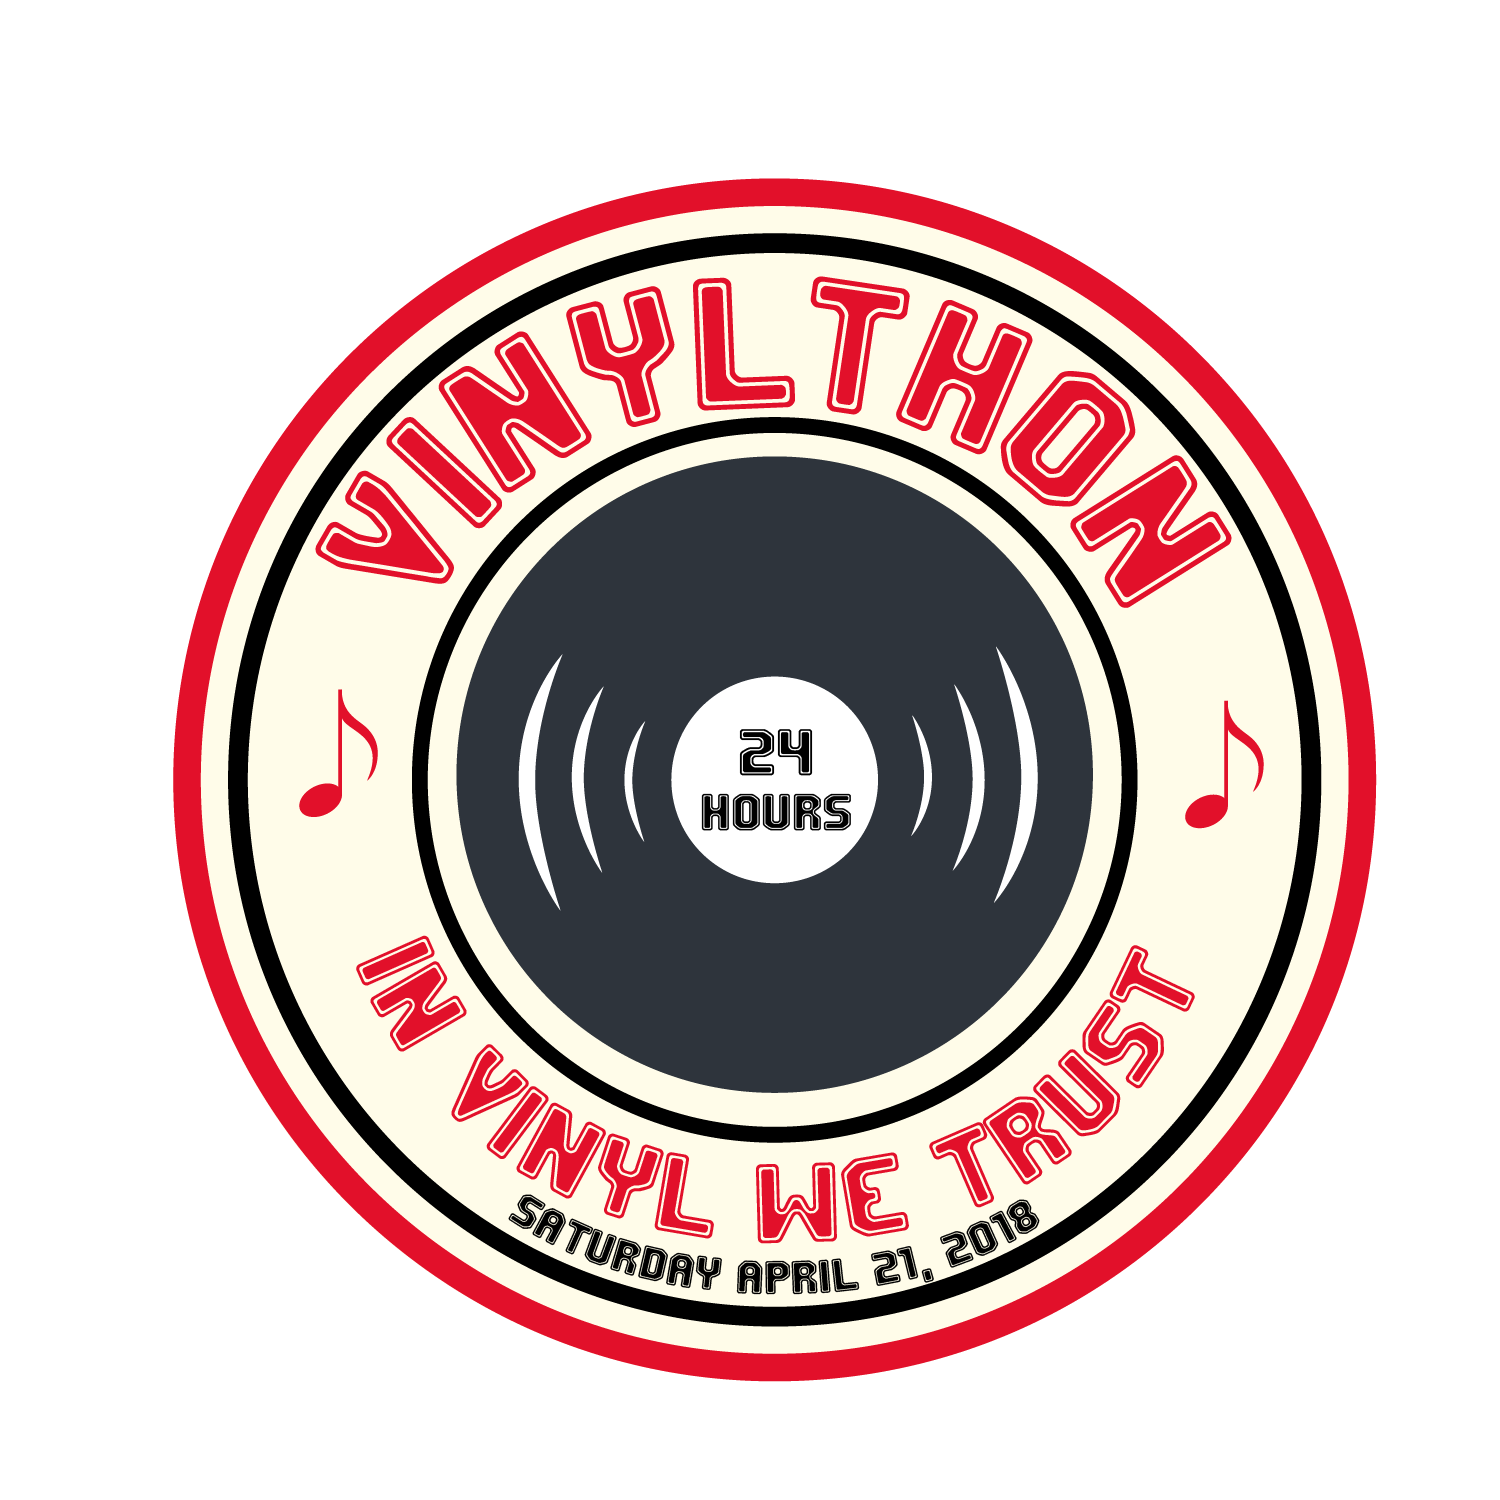 ‘Vinylthon 2018’ Unites Over 90 College Radio Stations This Saturday Playing Records All Day